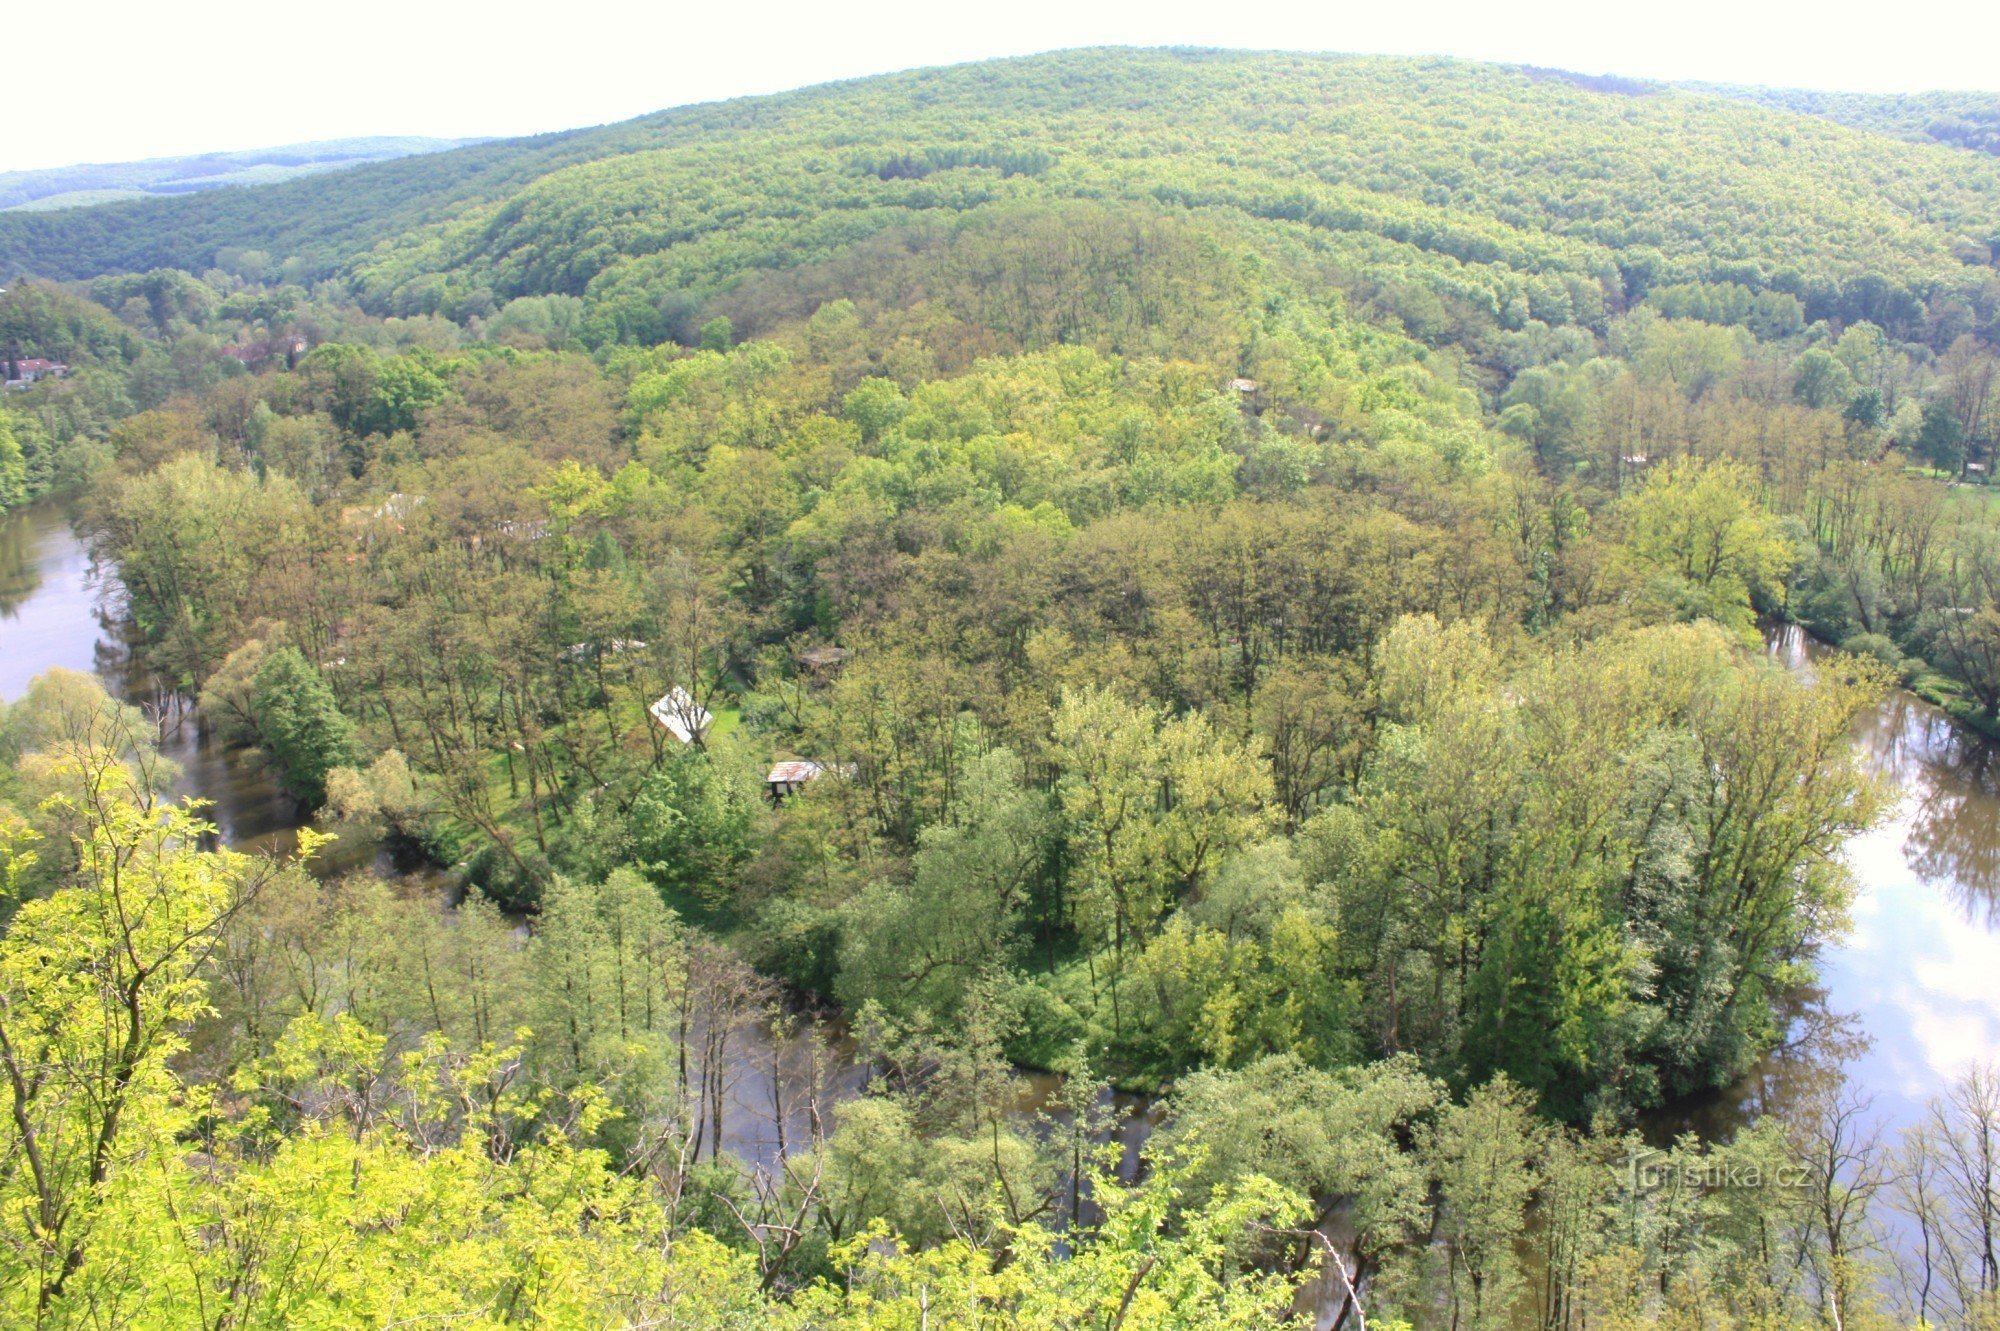 View across the valley to the forested ridge of the Rhine